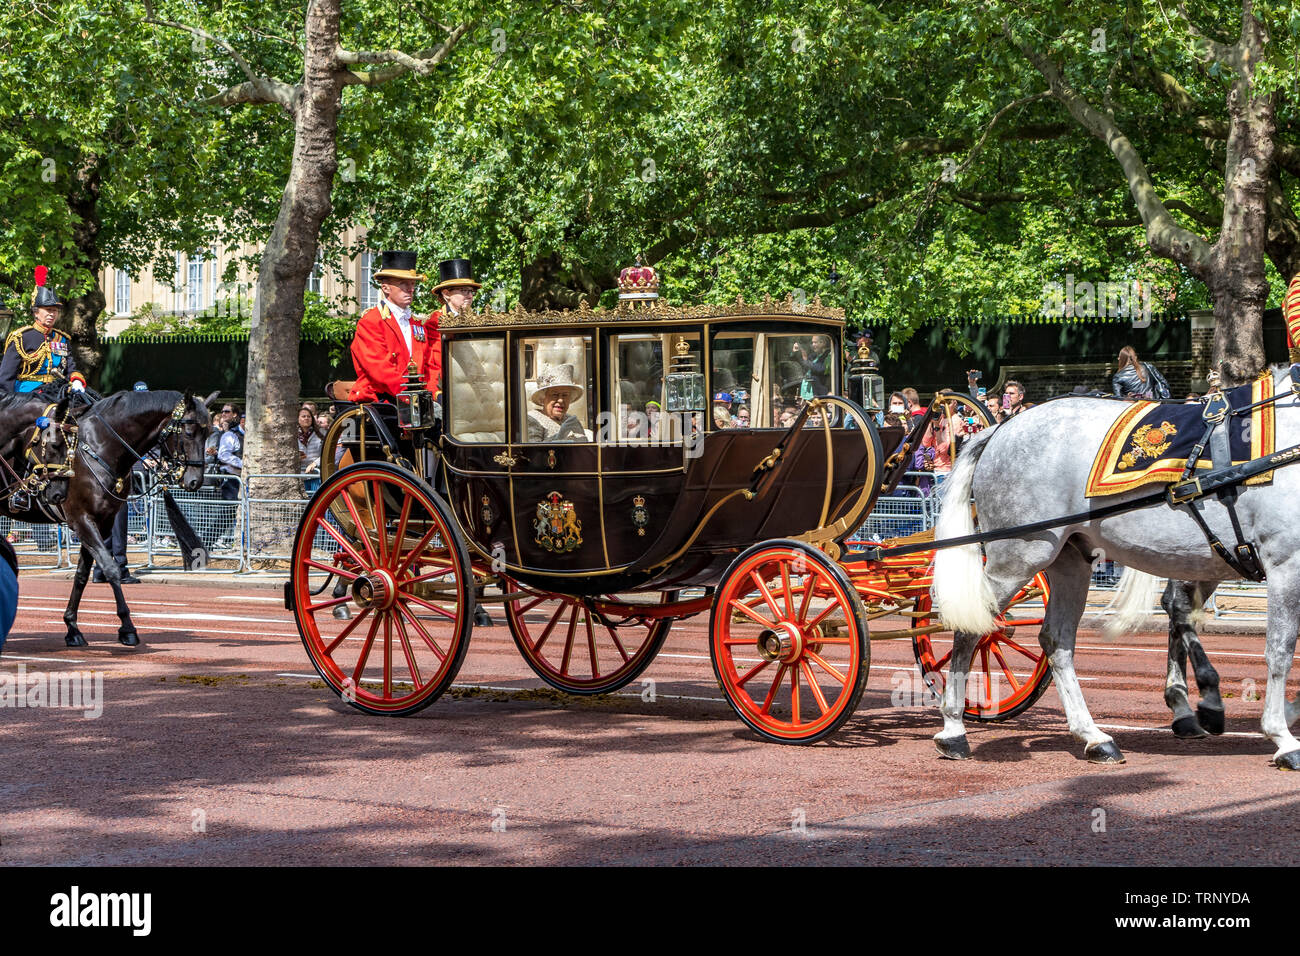 Her Majesty The Queen riding in The Scottish State Coach along The Mall at The Trooping The Colour ceremony ,London 2019 Stock Photo